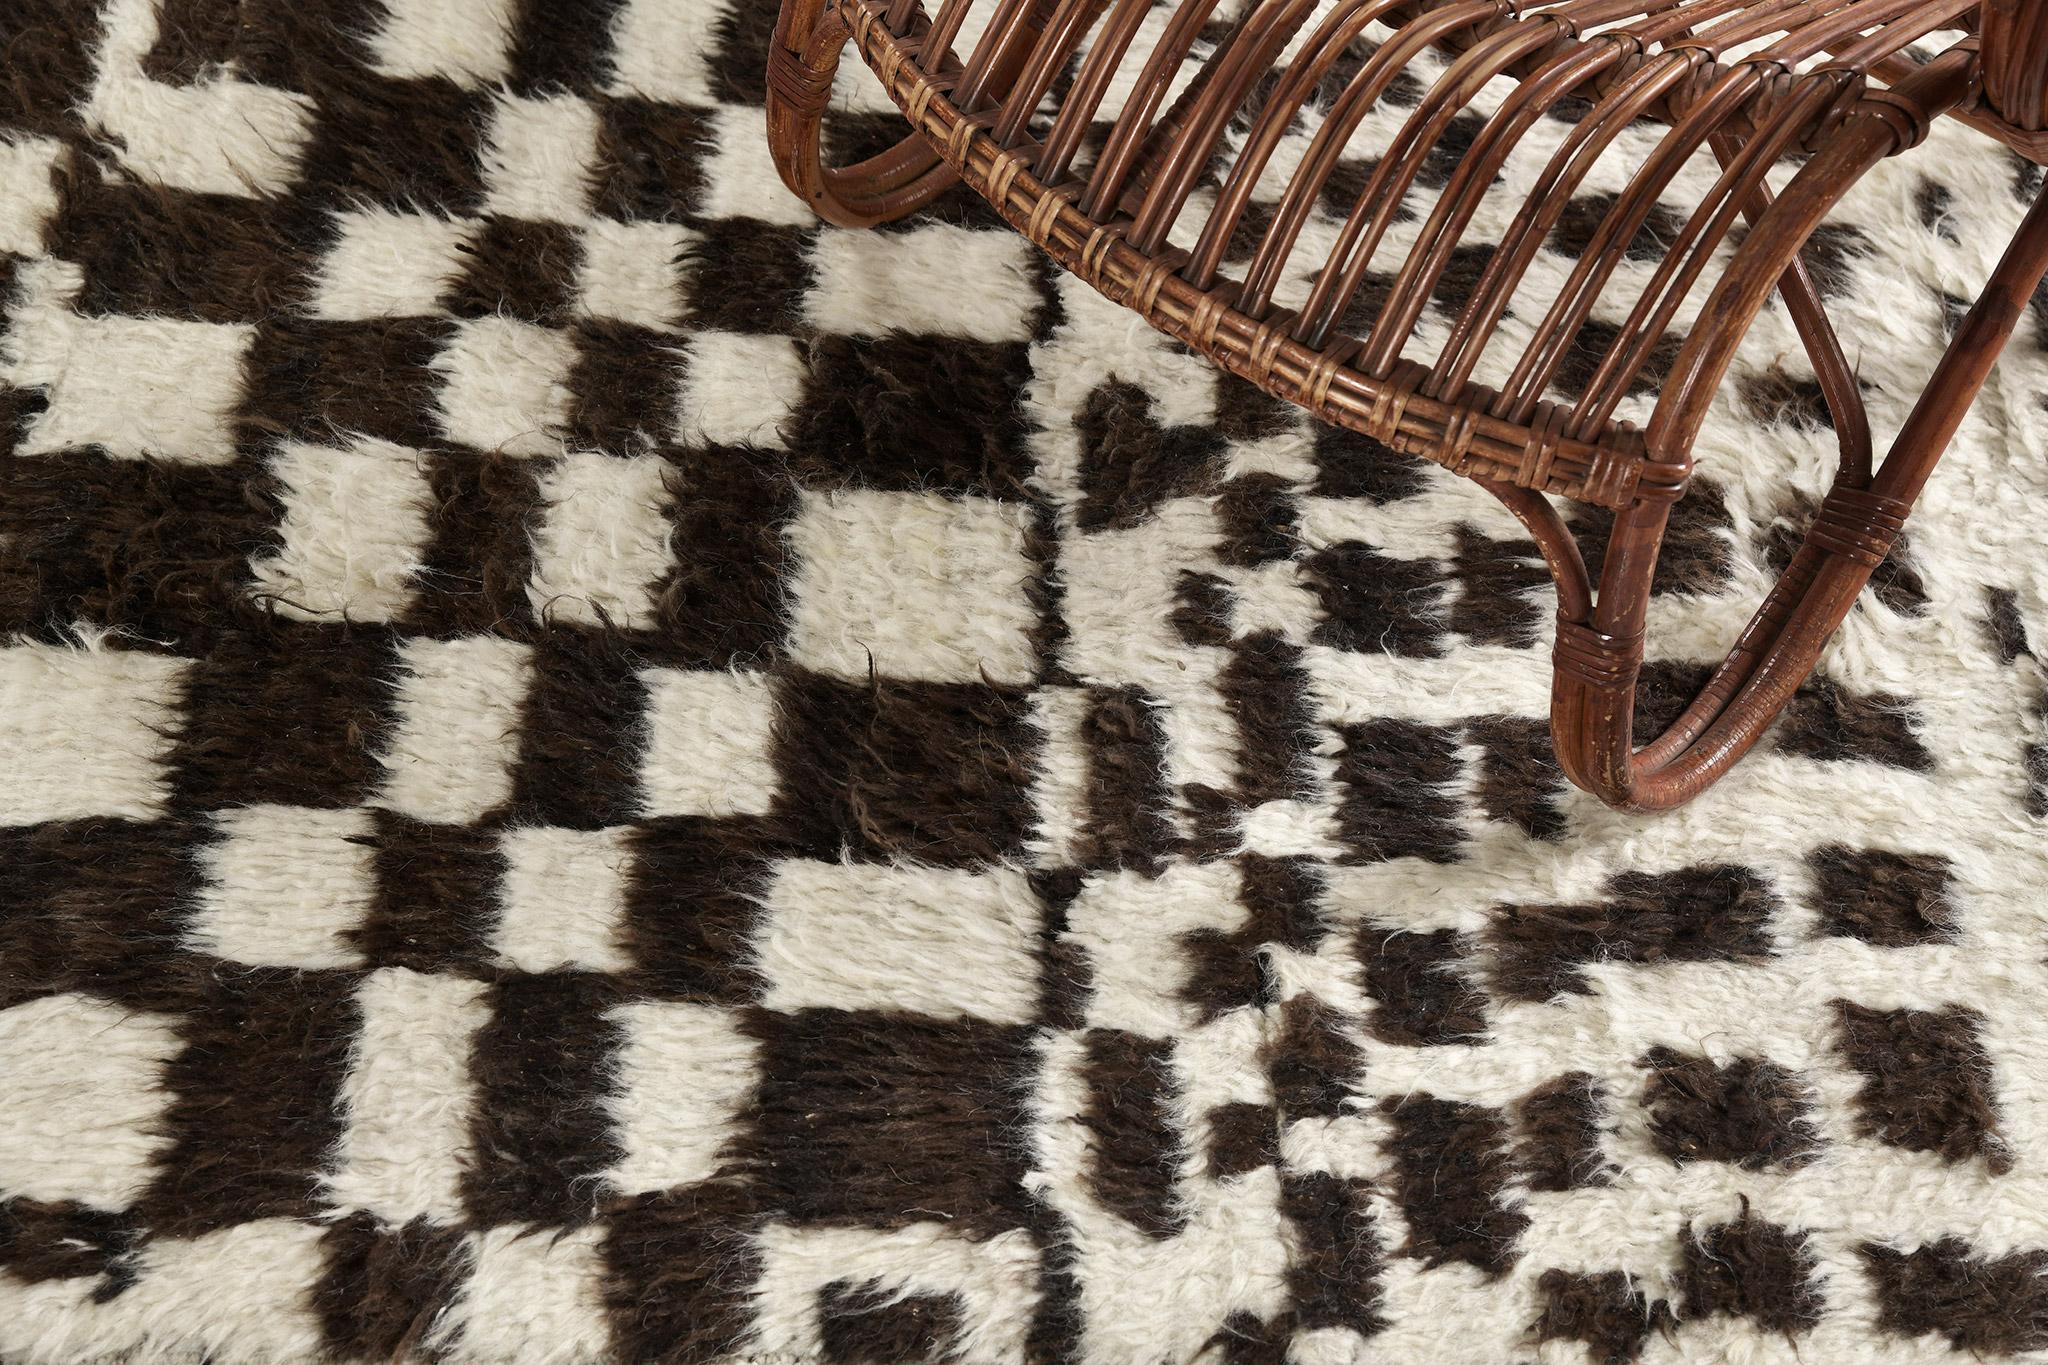 Revealing the series of uneven checkered motifs, Jugo’ is a phenomenal rug that will captivate you in every possible way. Featuring earthy neutral tones of umber brown and ivory, this rug creates an impressive pattern perfect to be placed in an